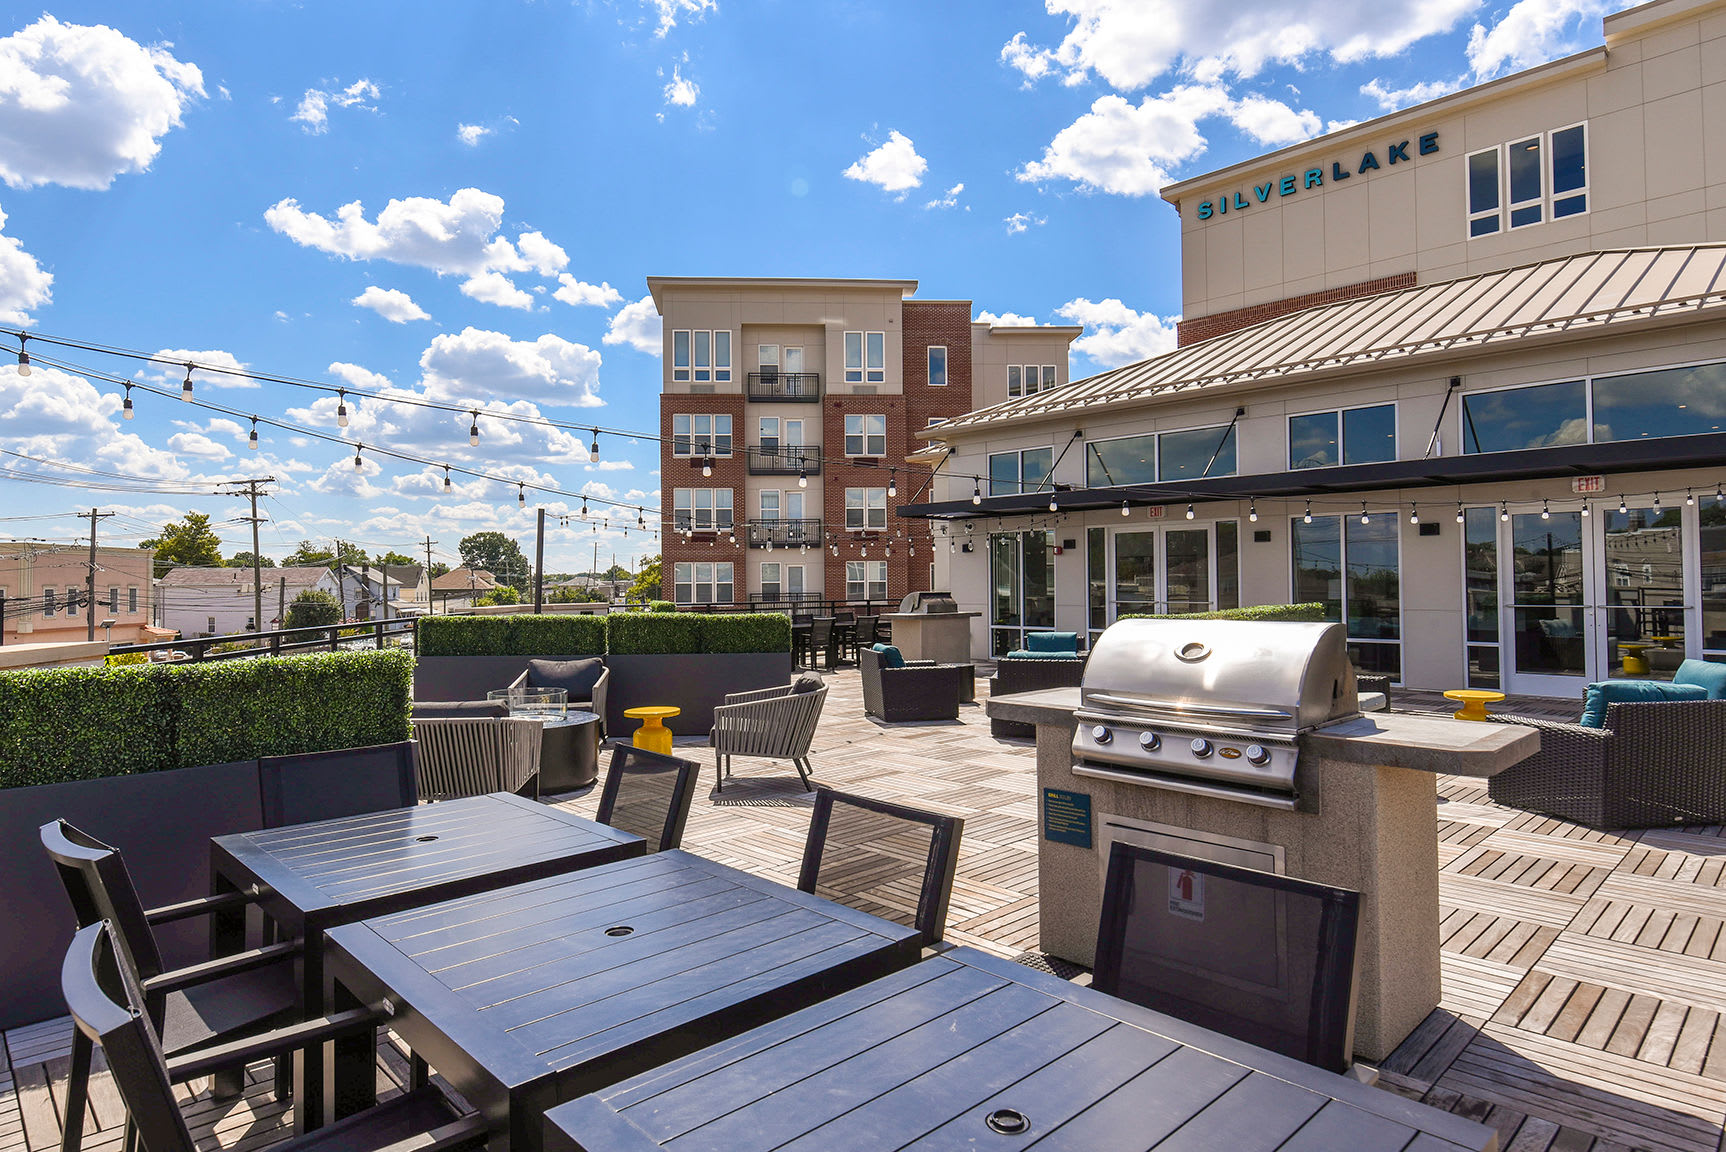 Patio with a grill at SilverLake, Belleville, New Jersey